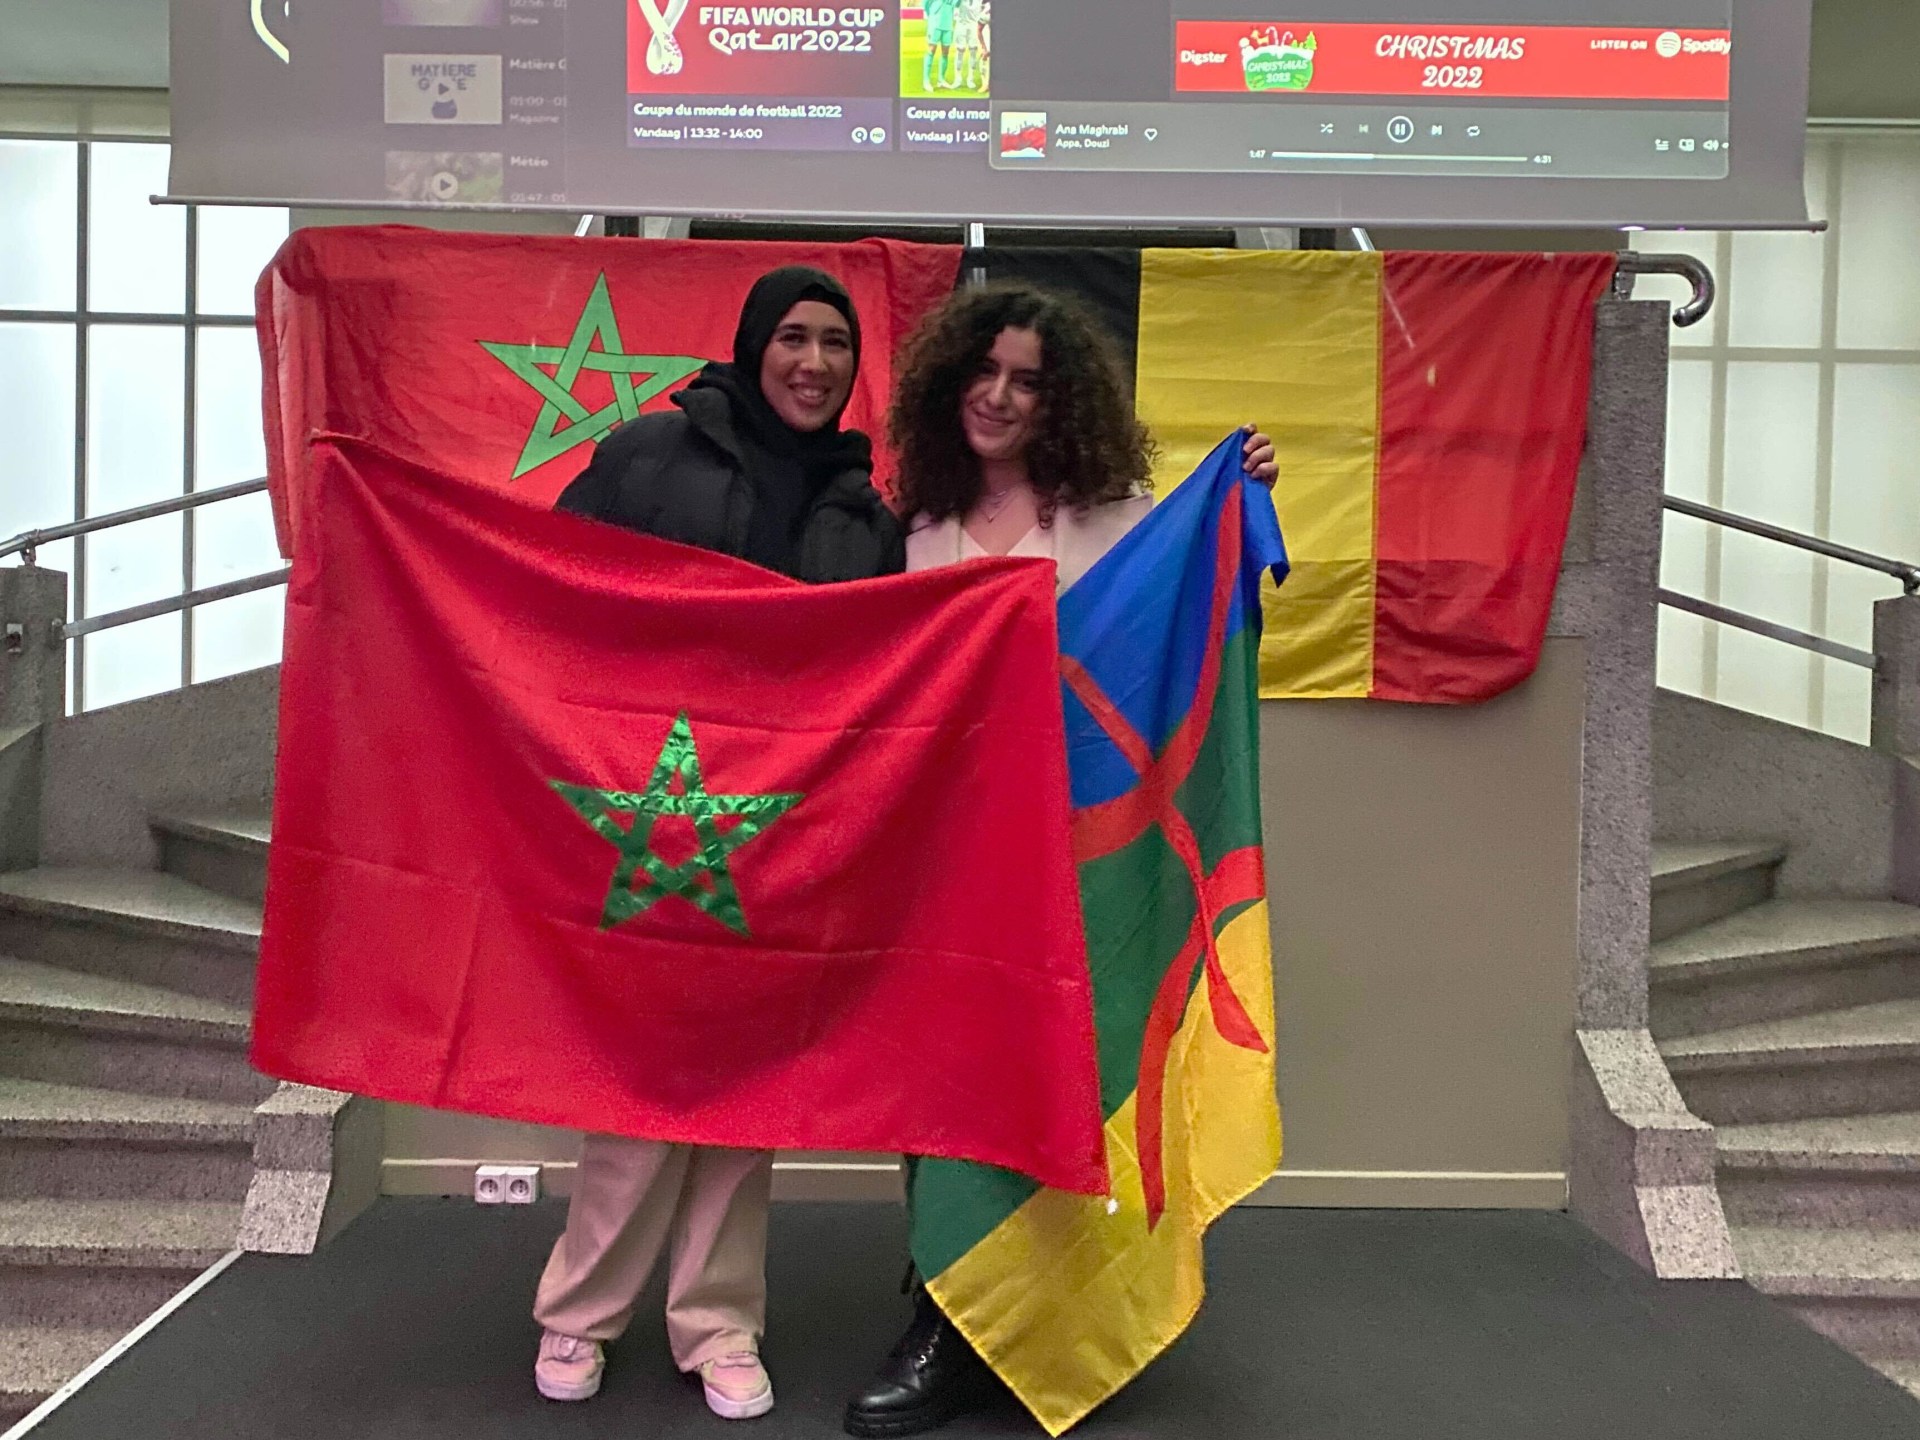 Morocco fans in Belgium elated over World Cup win | Qatar World Cup 2022